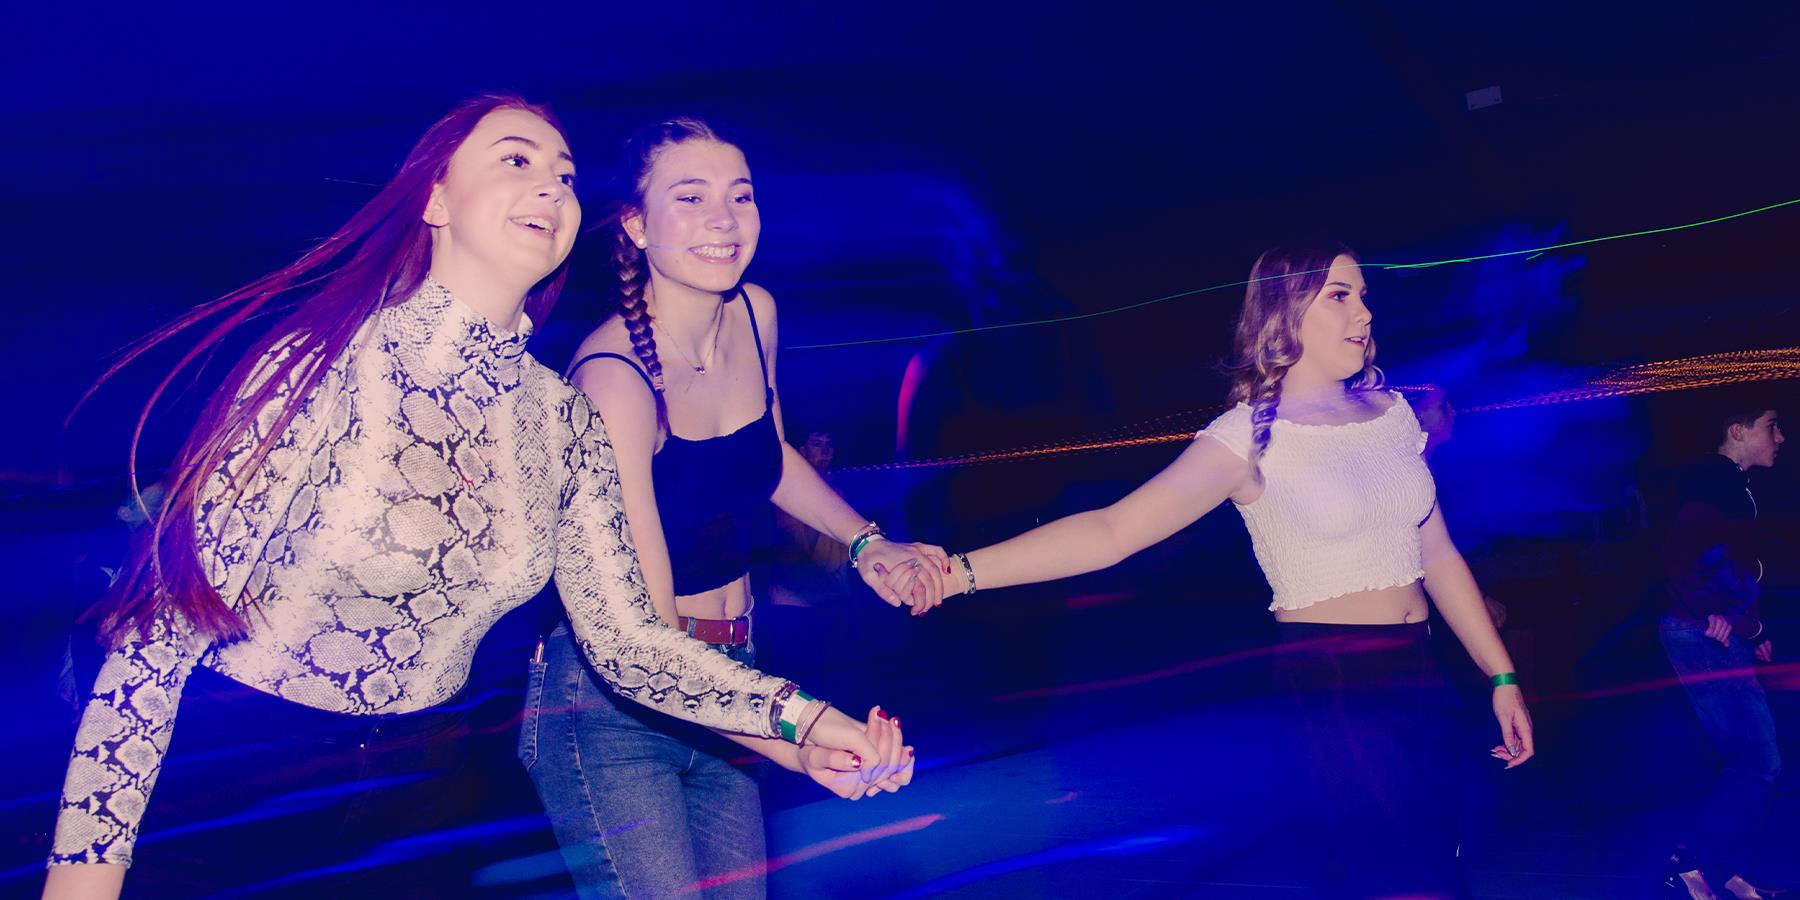 Enjoy the grooves and moves of a Friday roller skating disco